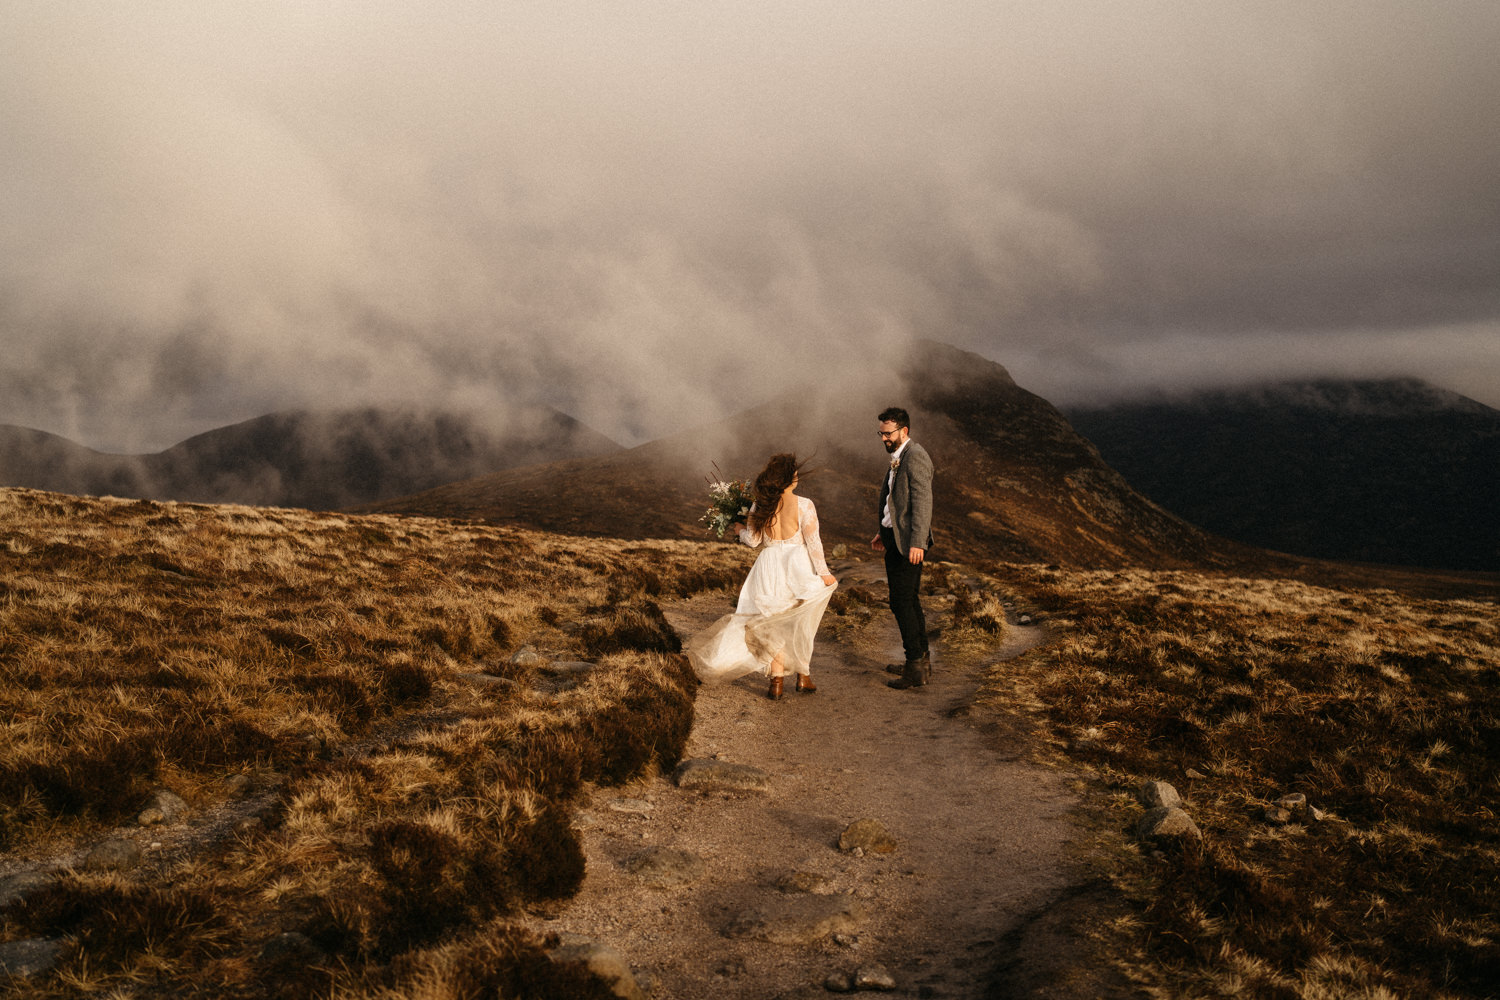 https://thethreebearsphotography.com/wp-content/uploads/2021/04/Mourne-Mountains-Wedding-Photography-Photos-By-The-Three-Bears-Photography-0424.jpg